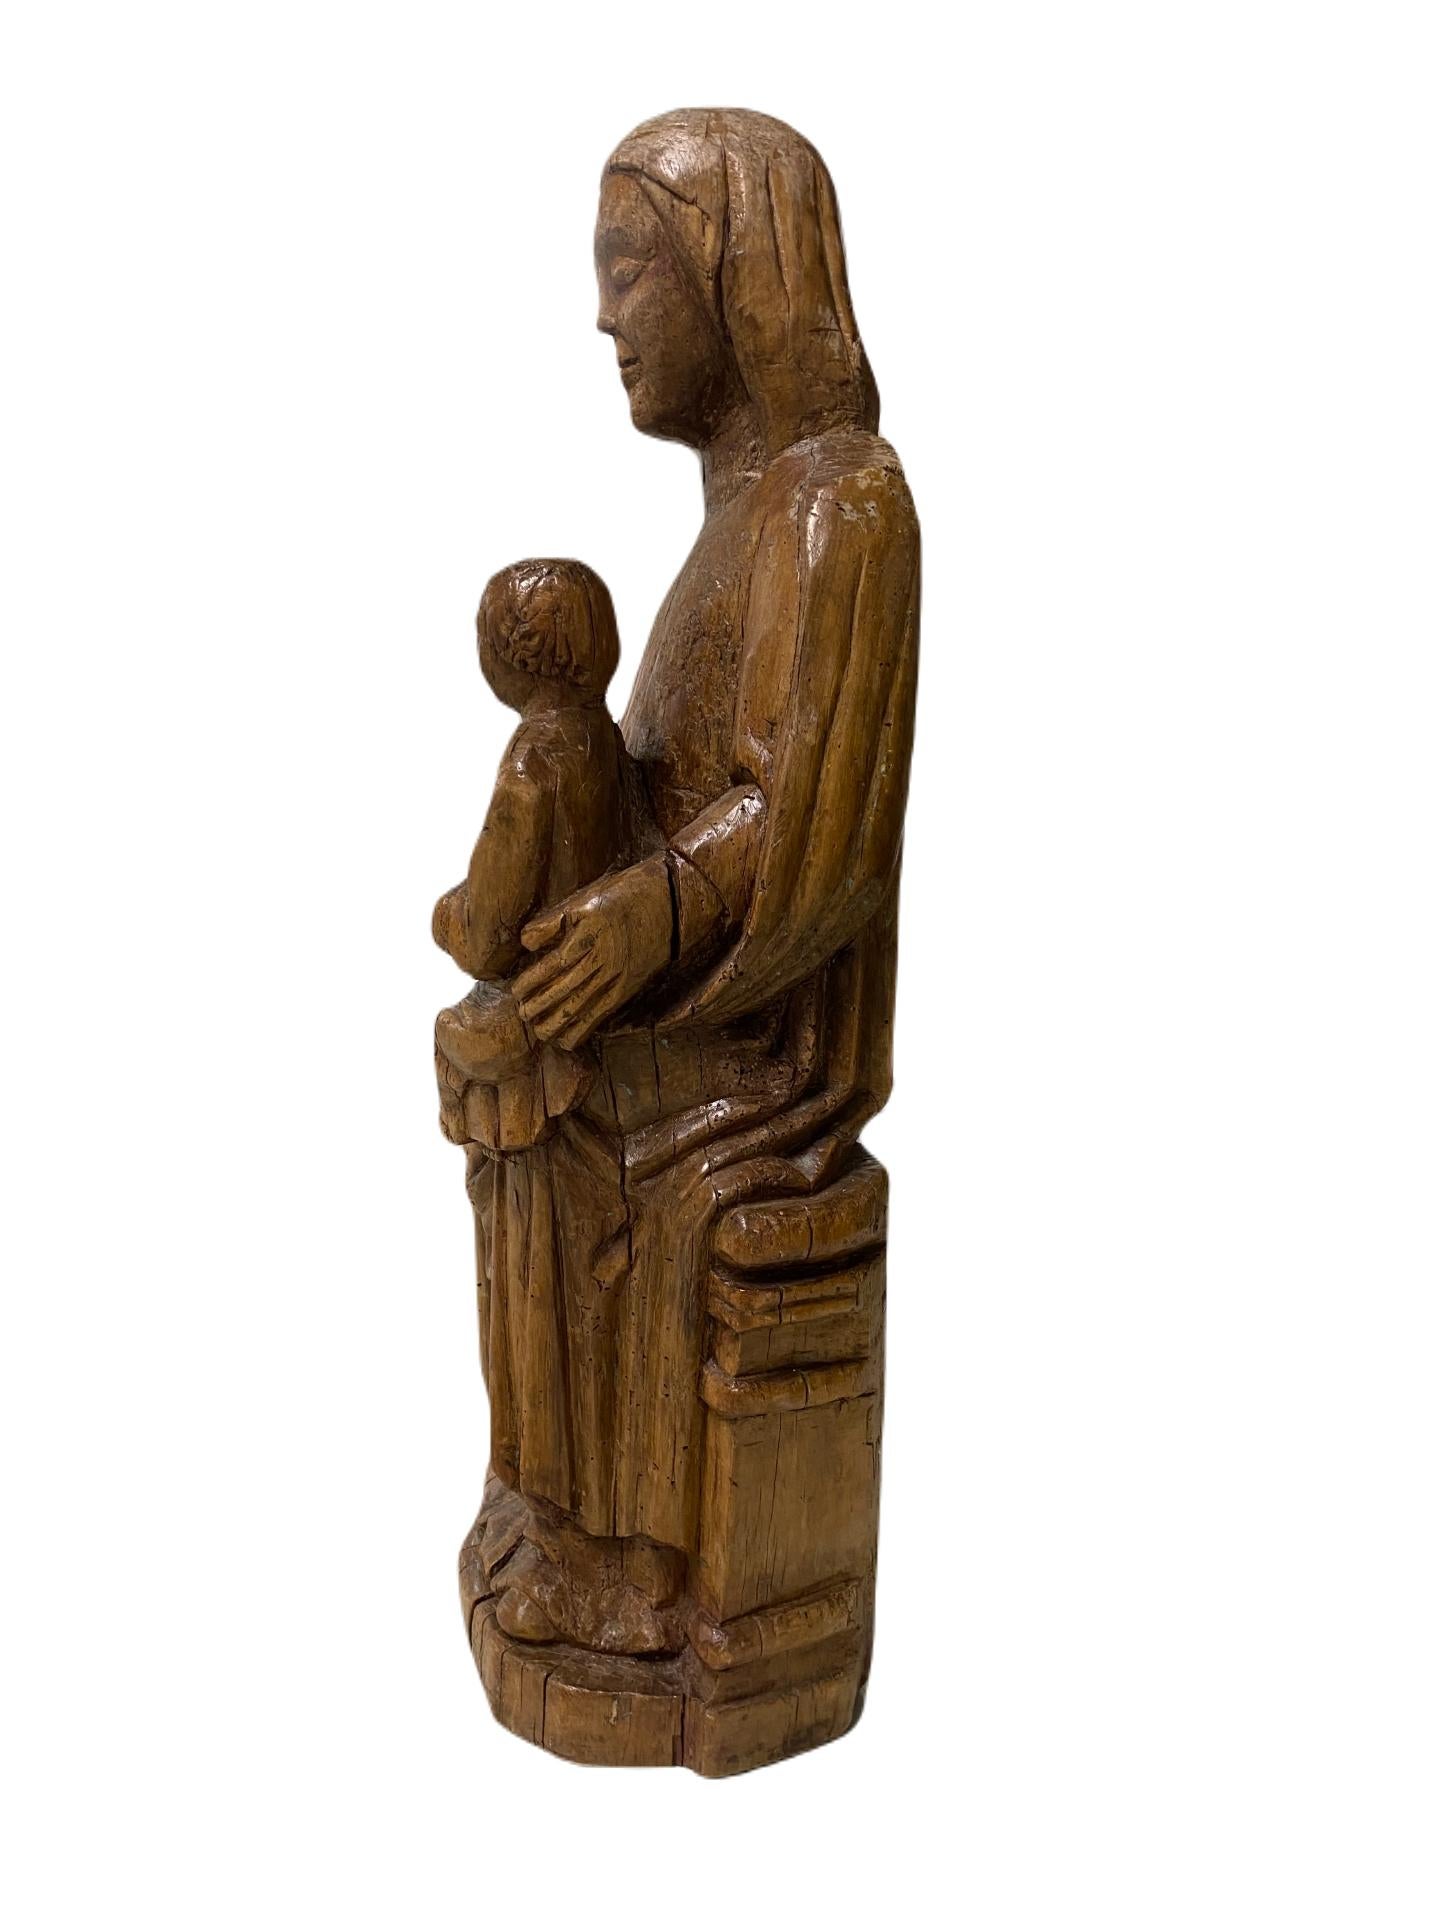 Enthroned Madonna and Child.  - Brown Figurative Sculpture by Unknown